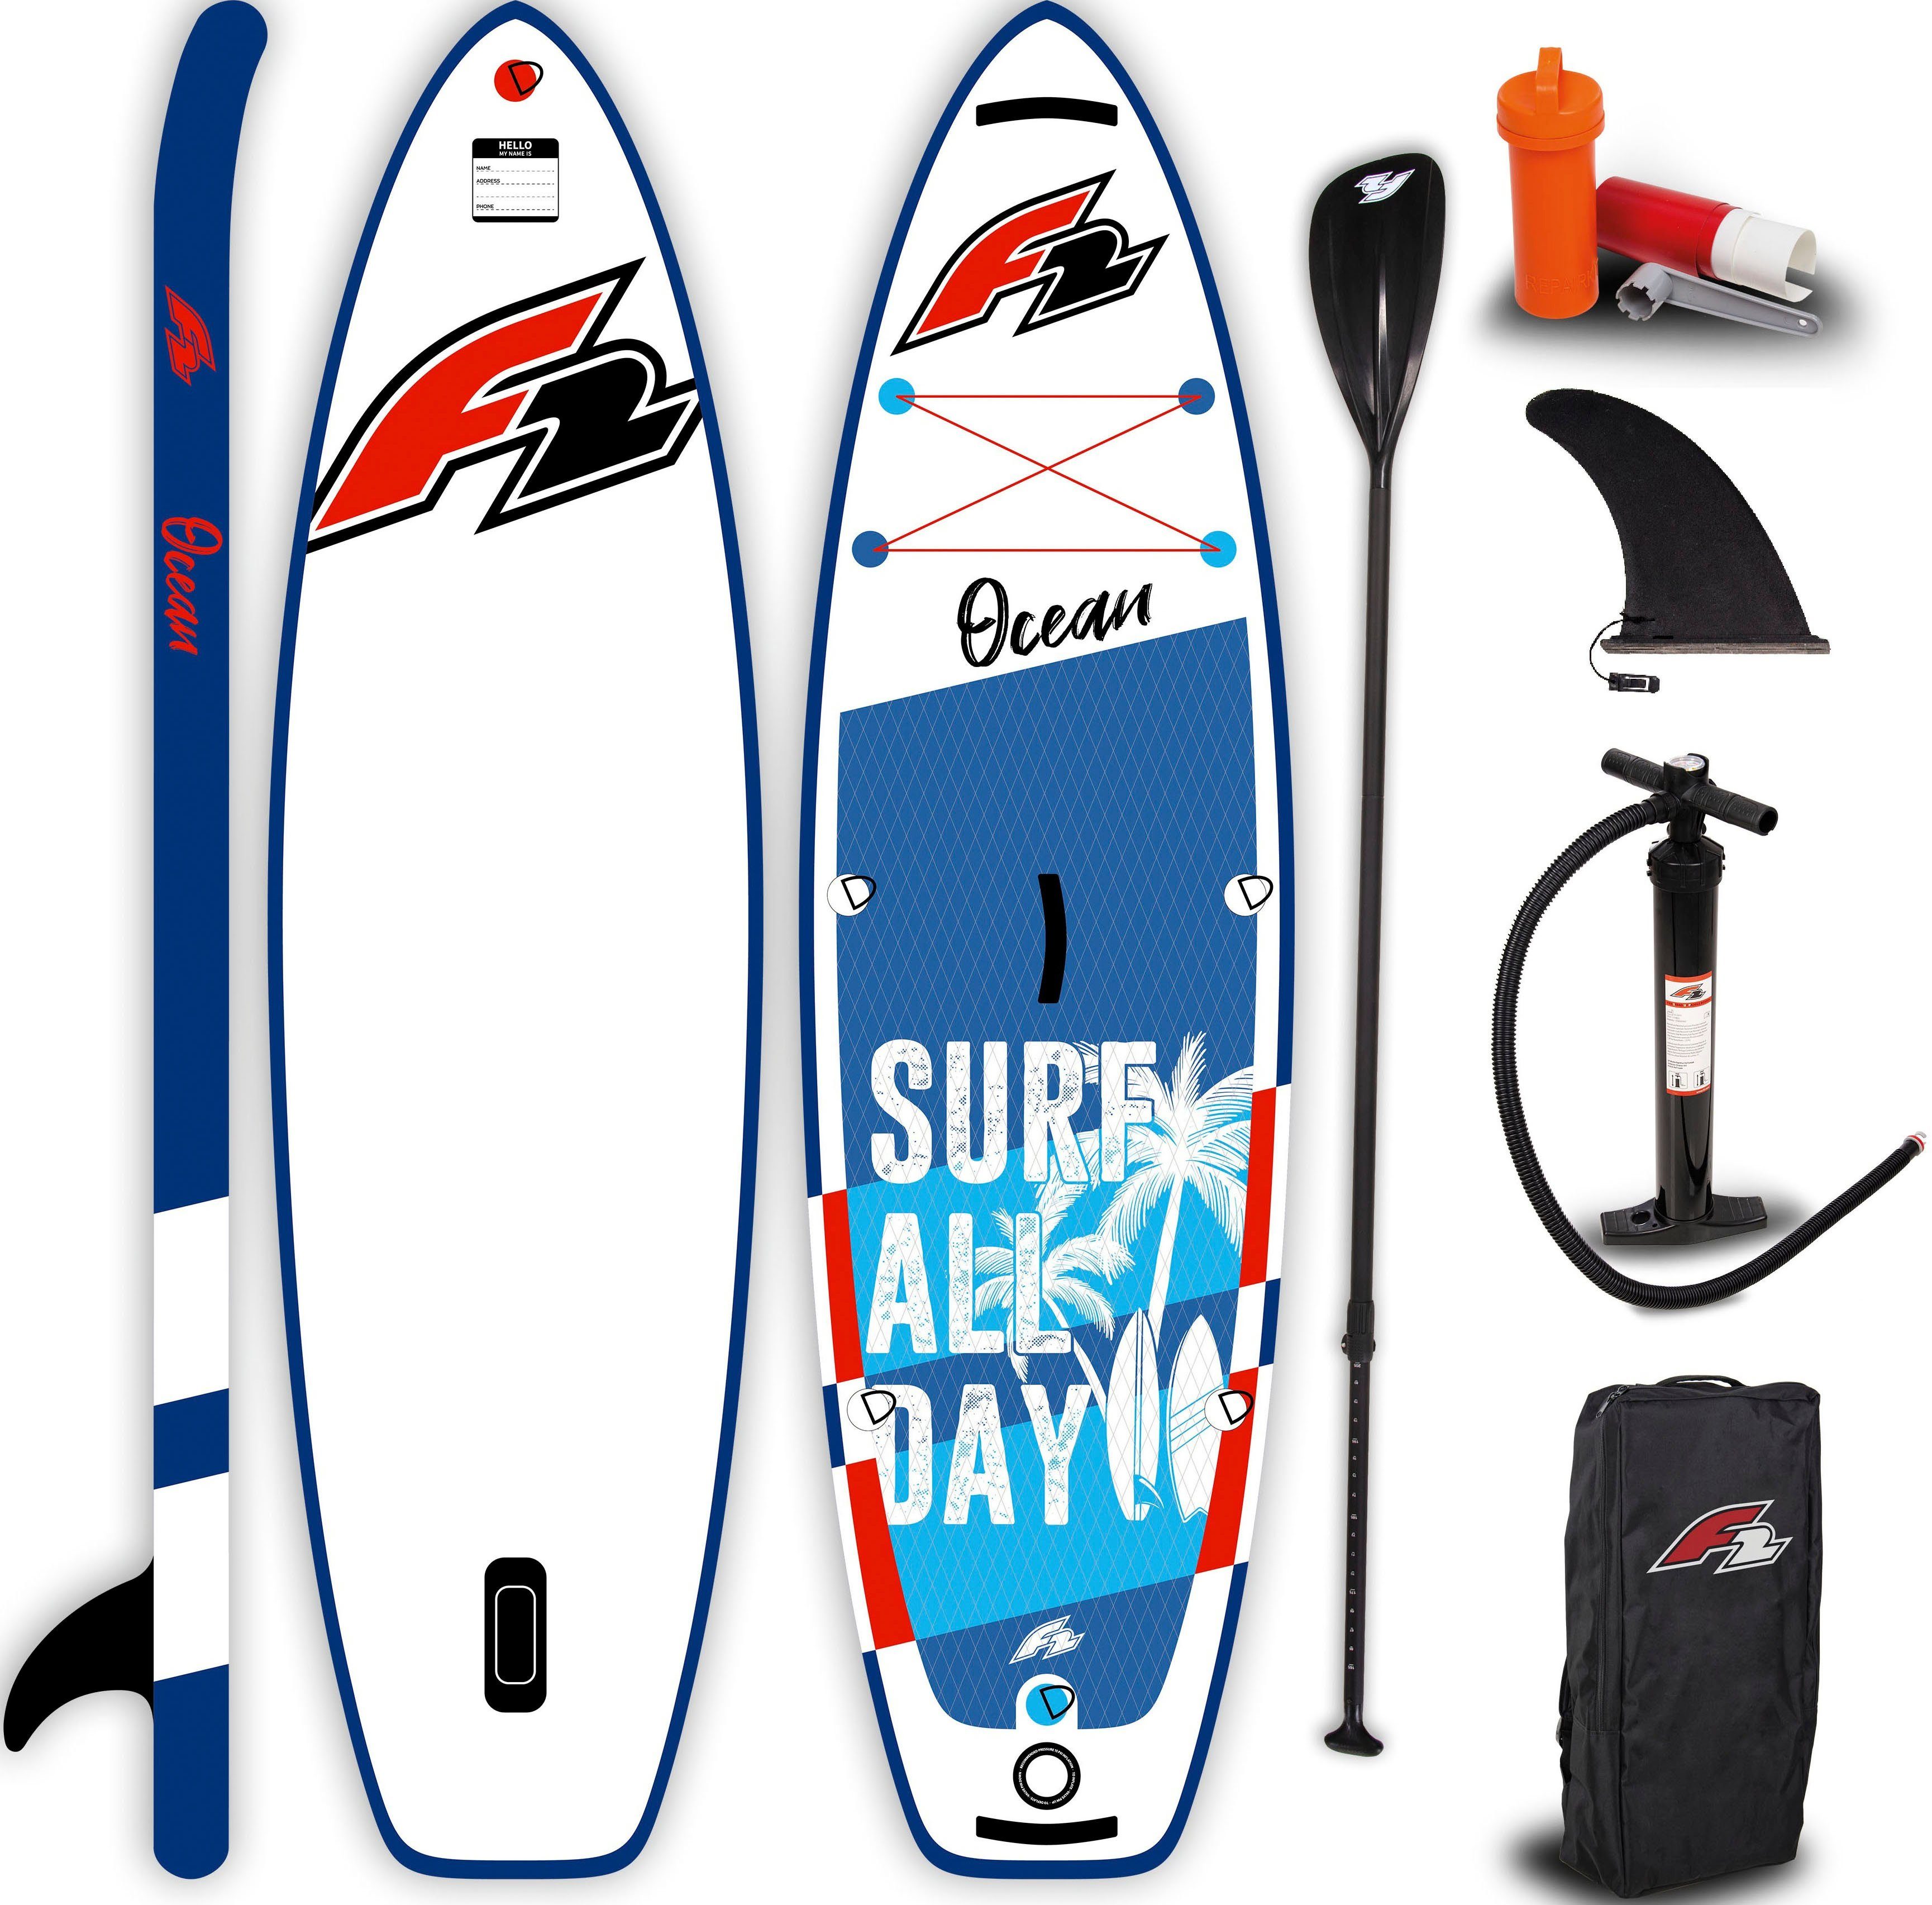 F2 Inflatable Ocean SUP-Board tlg) blue, 5 Kids (Packung, Boy